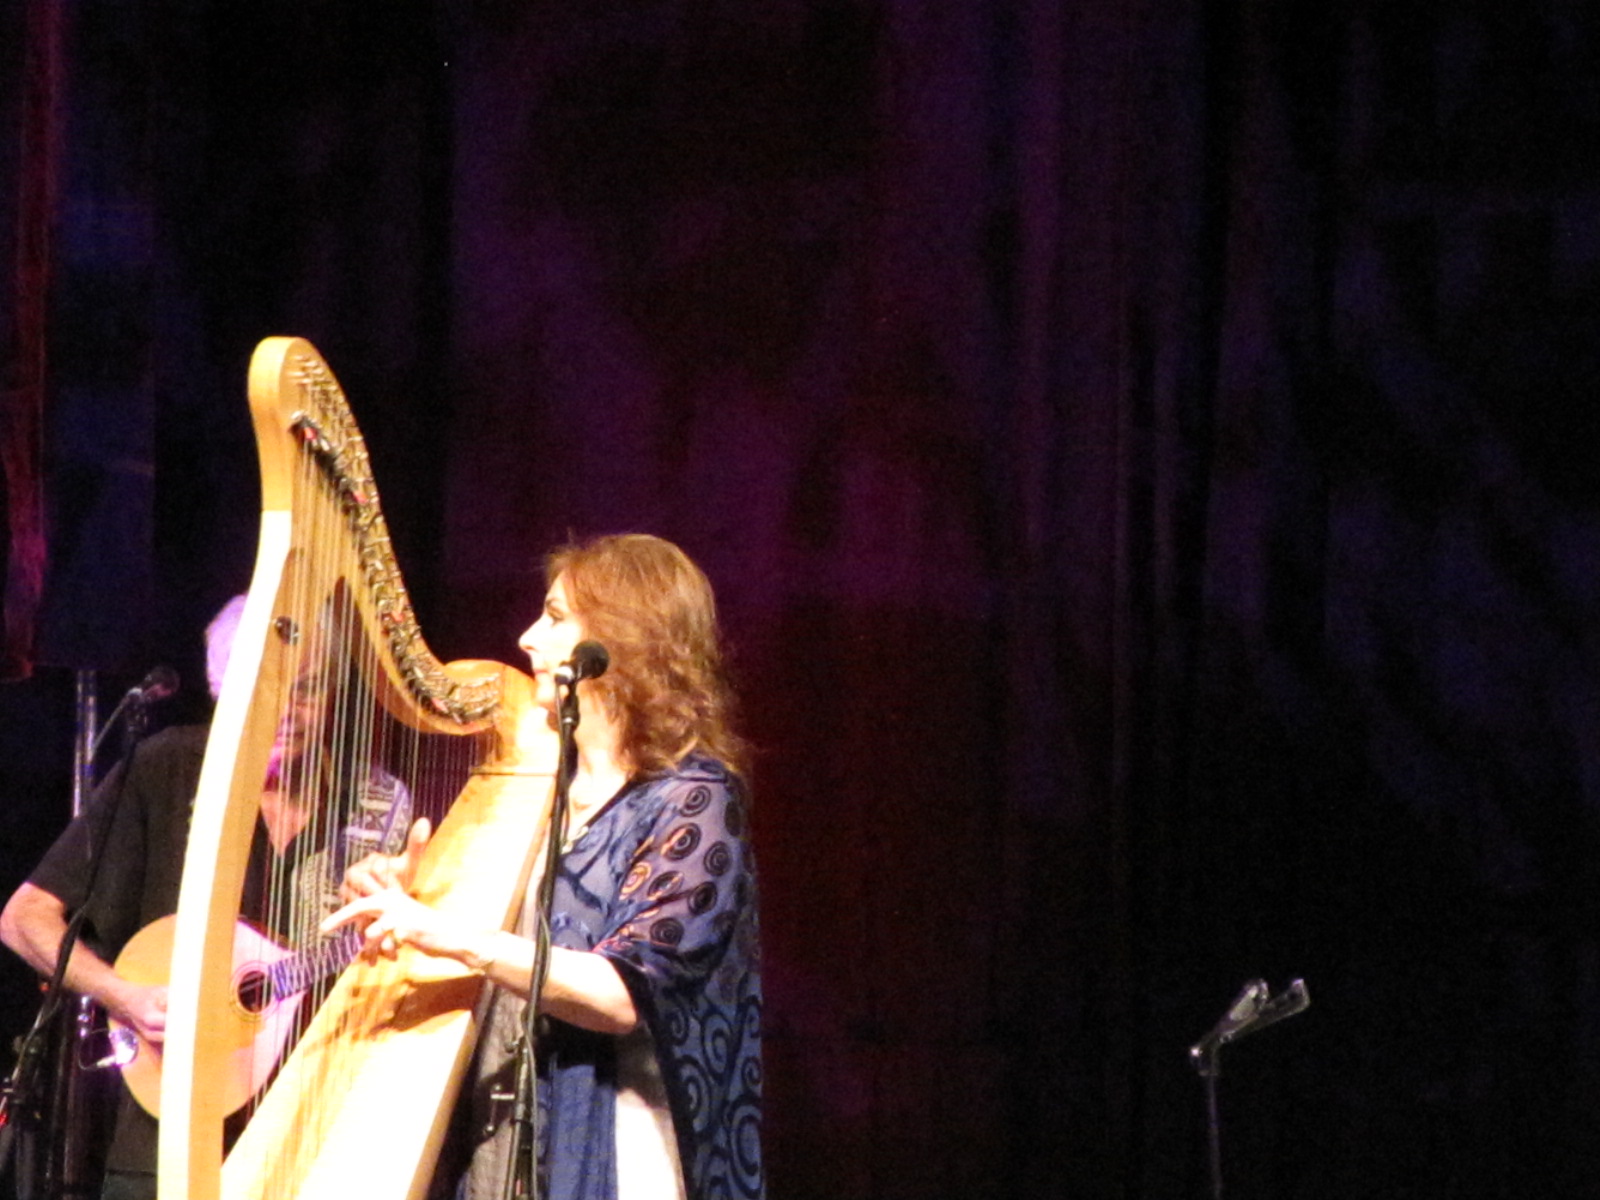 a woman wearing a blue and white top while playing a harp